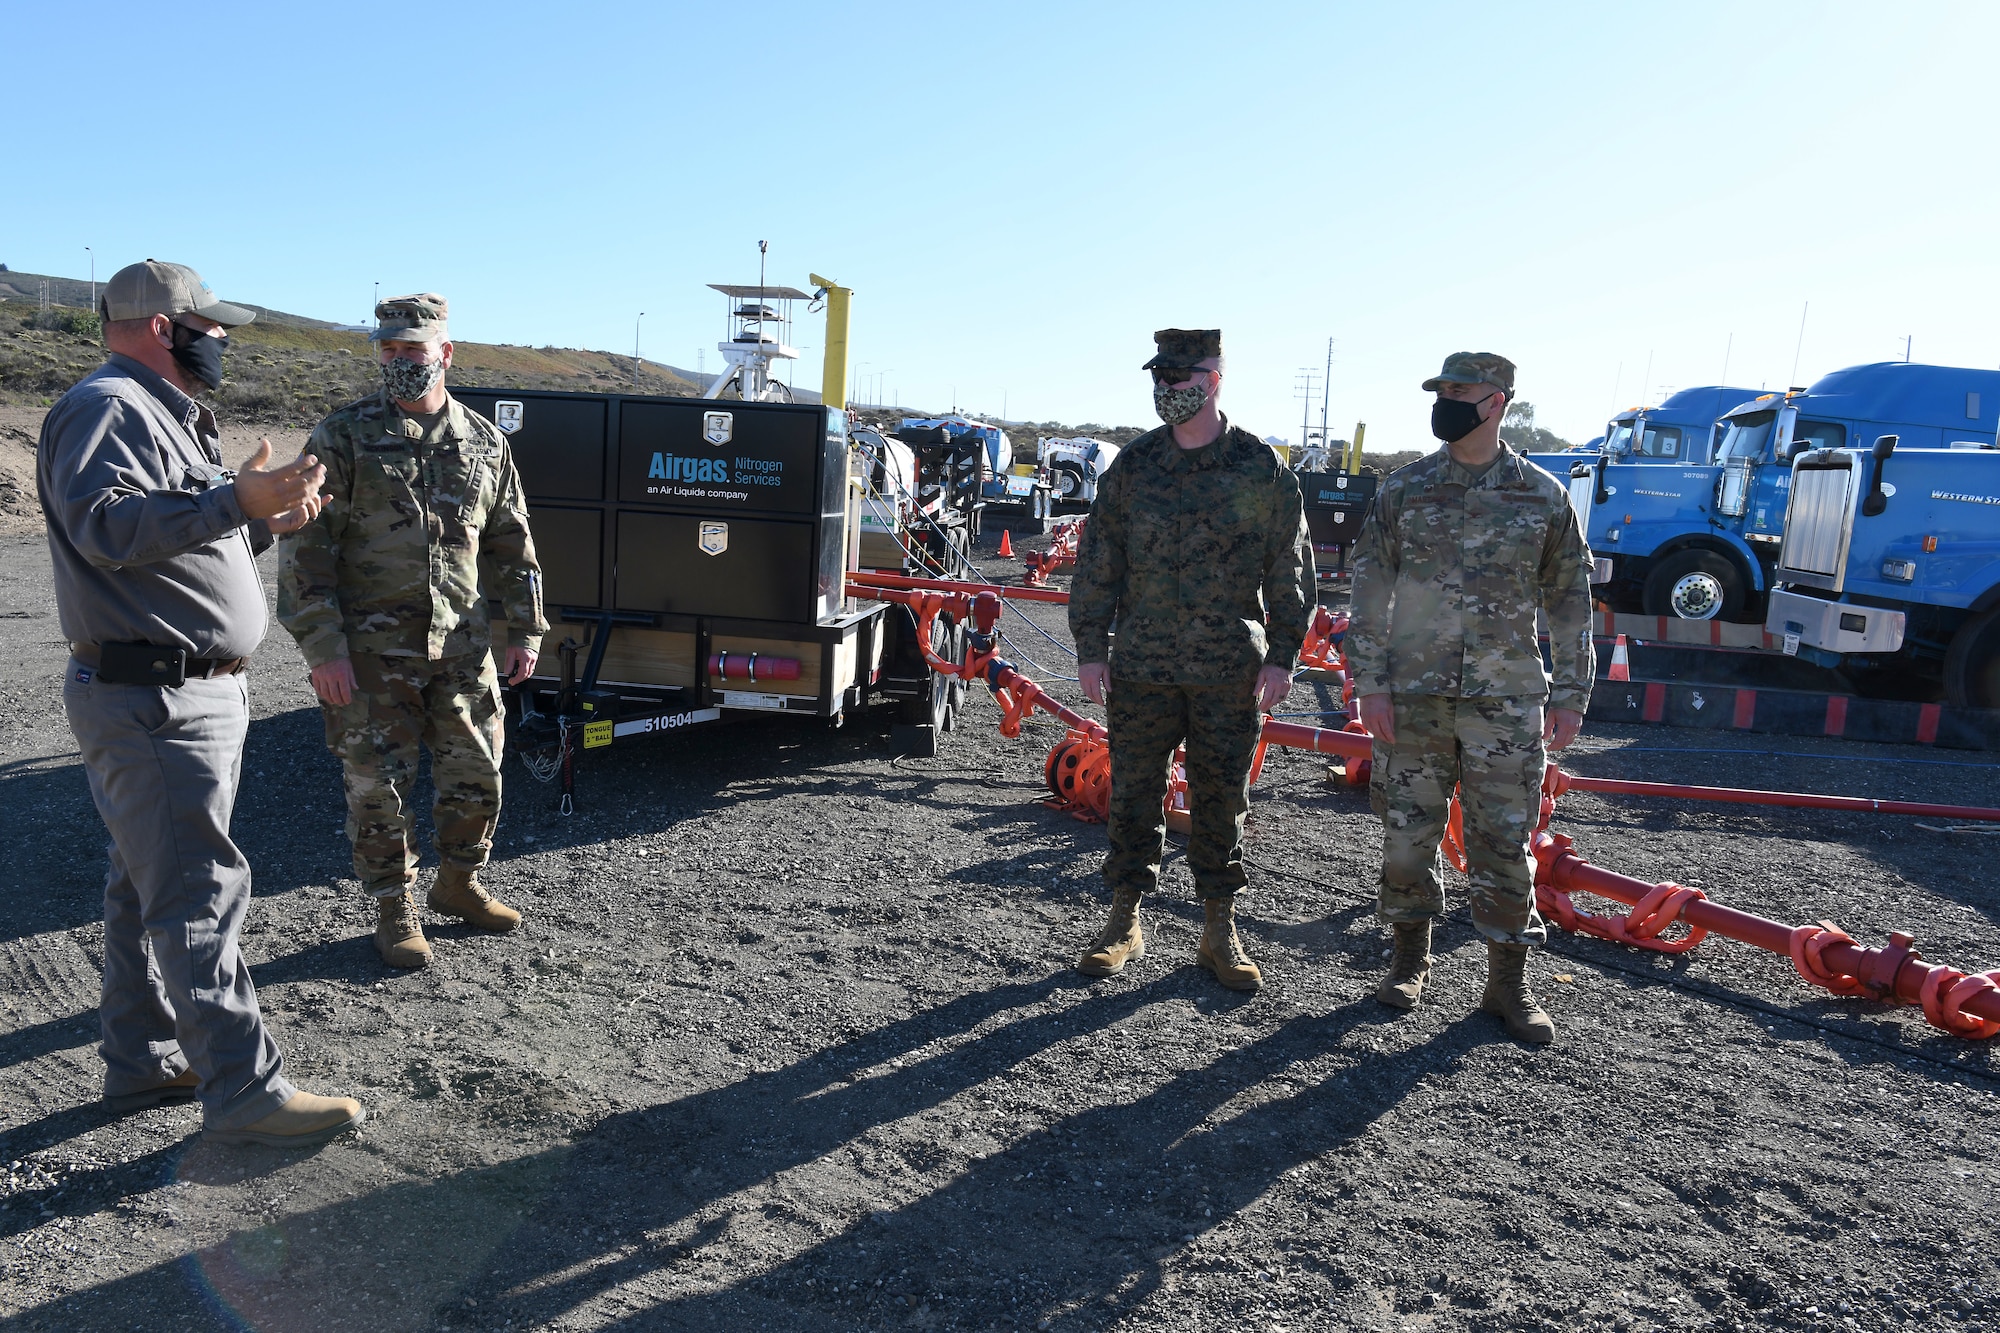 United States Space Command leadership and base leadership receive a briefing at the Gaseous Nitrogen pumper truck area Nov. 16, 2020, at Vandenberg Air Force Base, Calif.